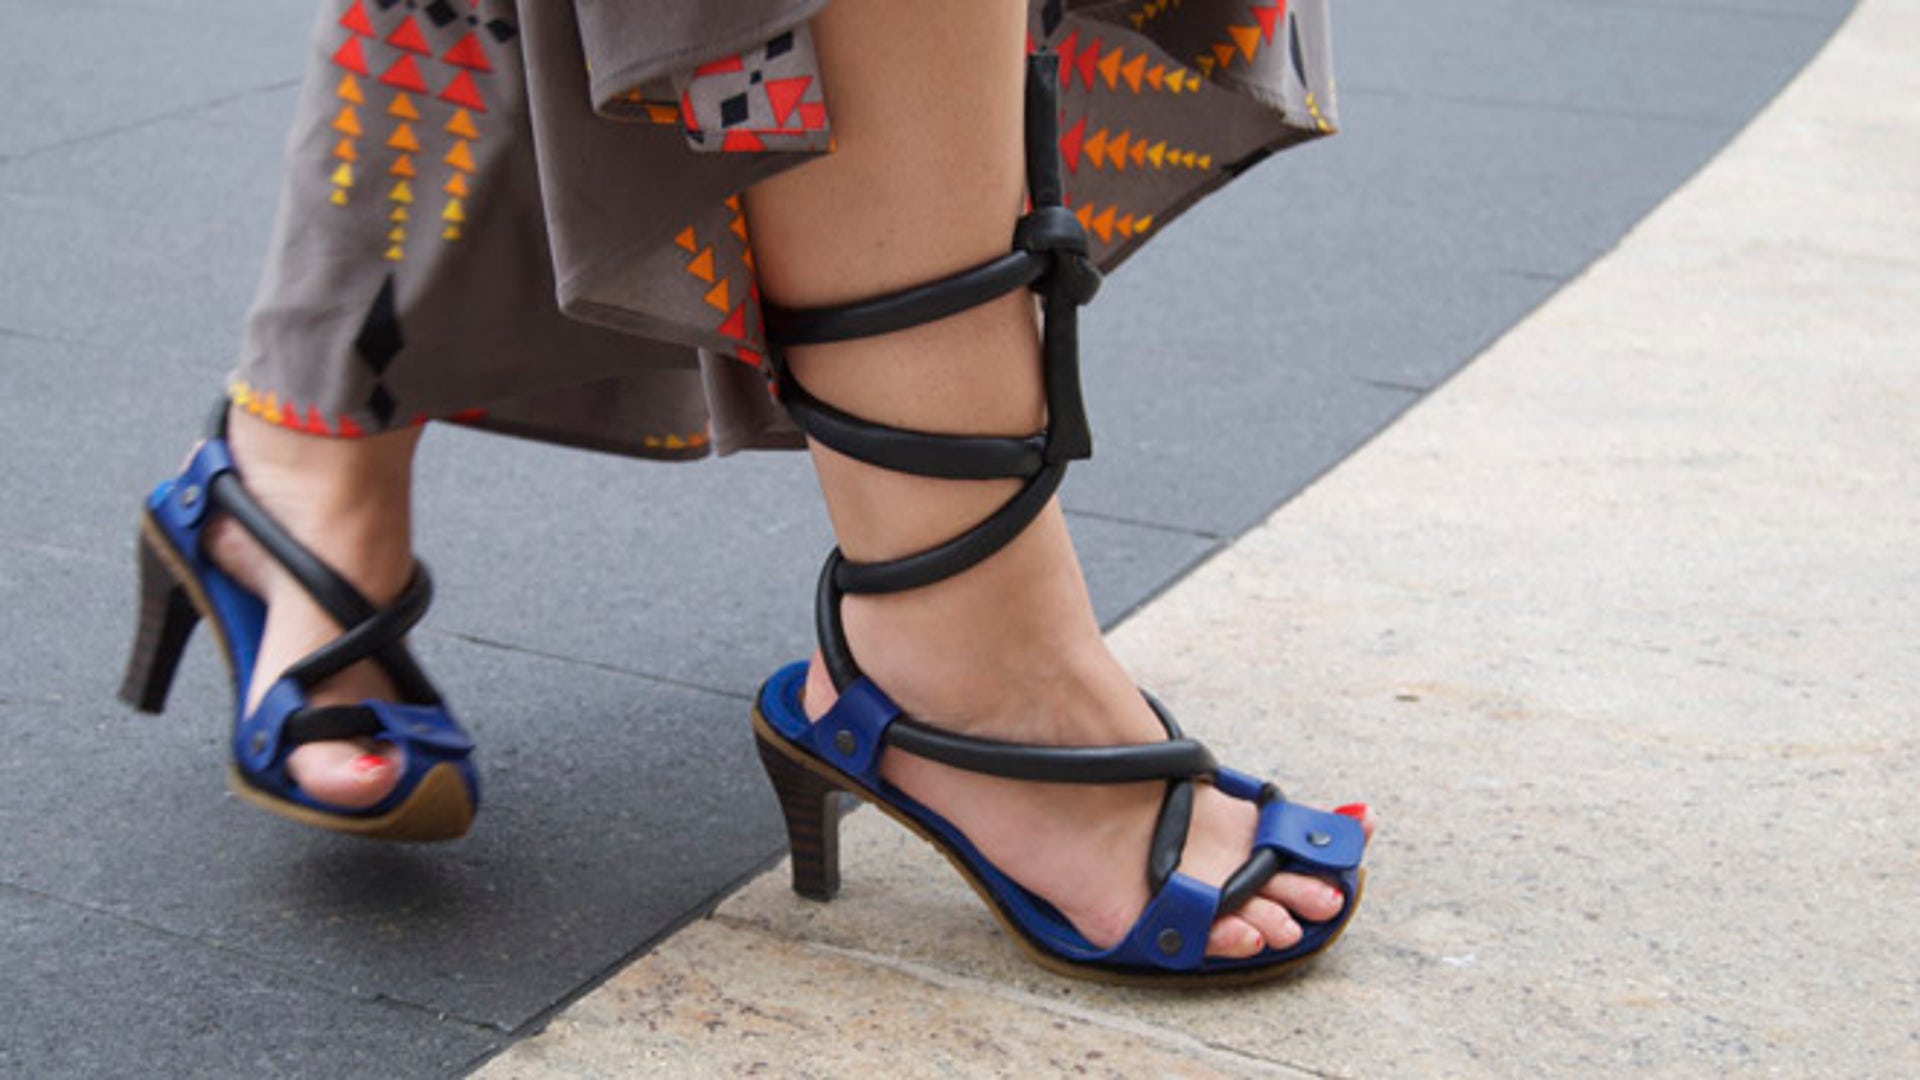 Fashion Week: Some shoes weren't made for walking | Fox News